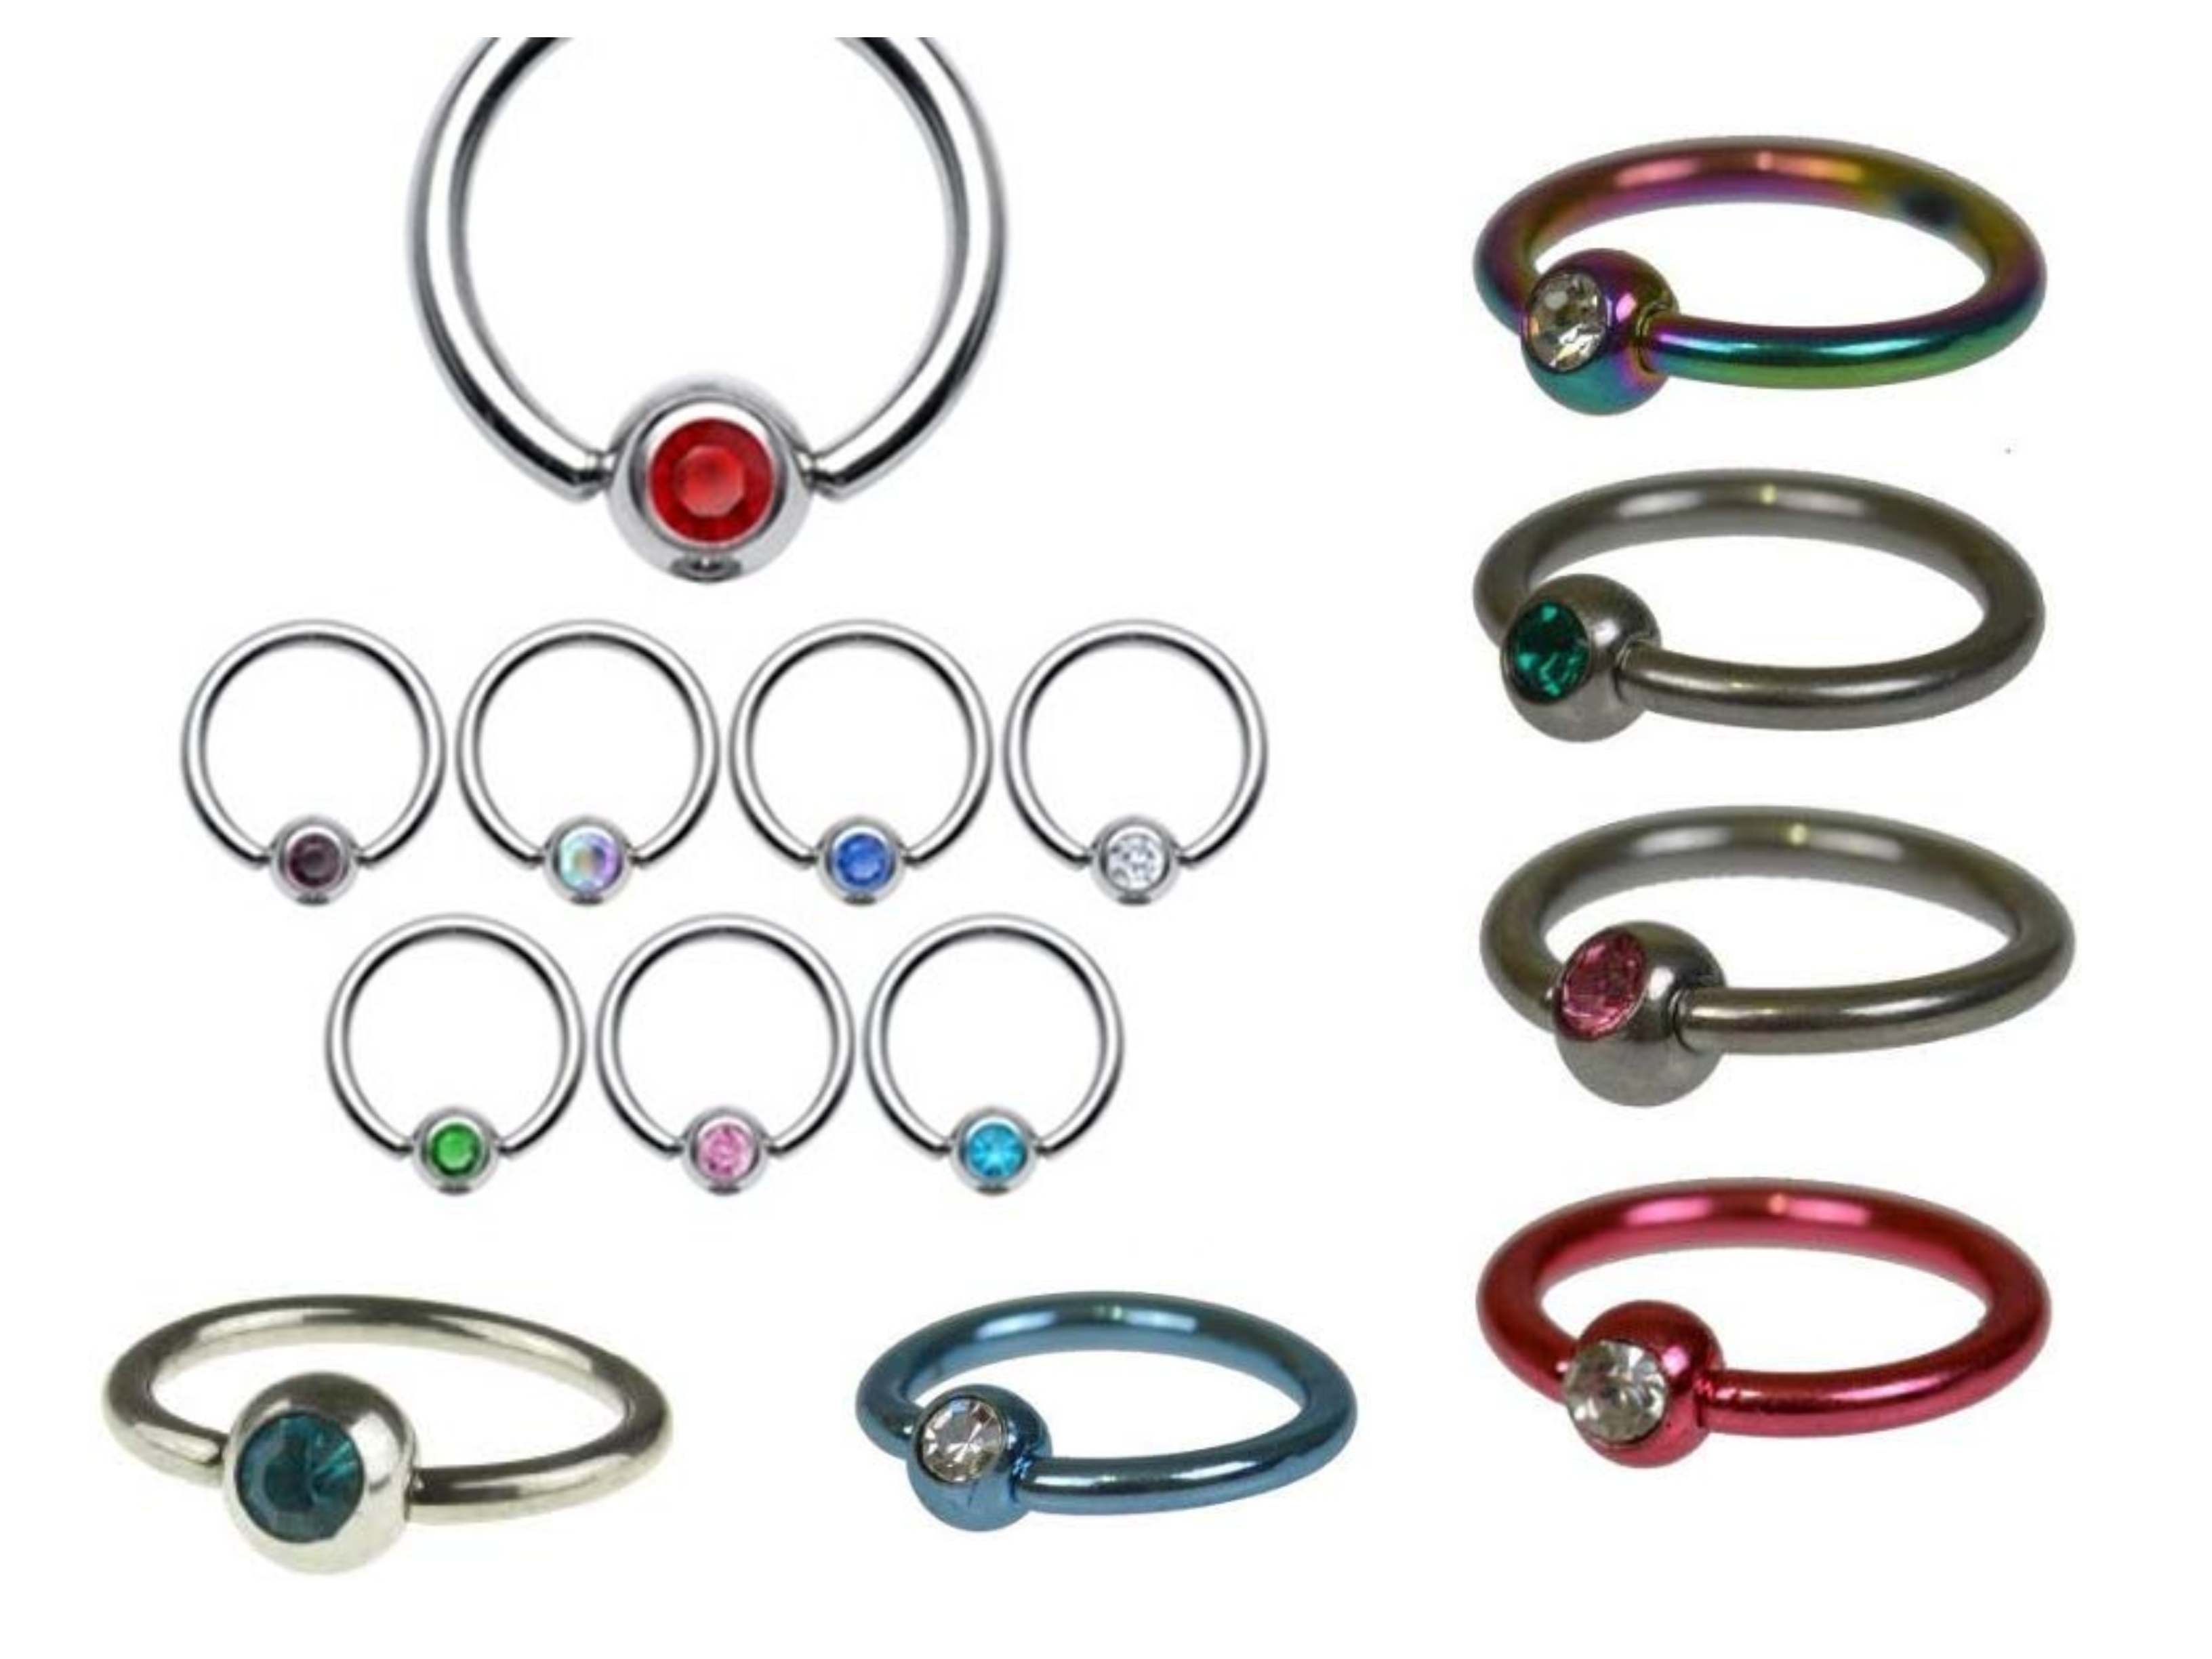 Joblot Of 50 Stainless Steel Crystal Captive Ball Ring Piercings Mixed Colours & Sizes